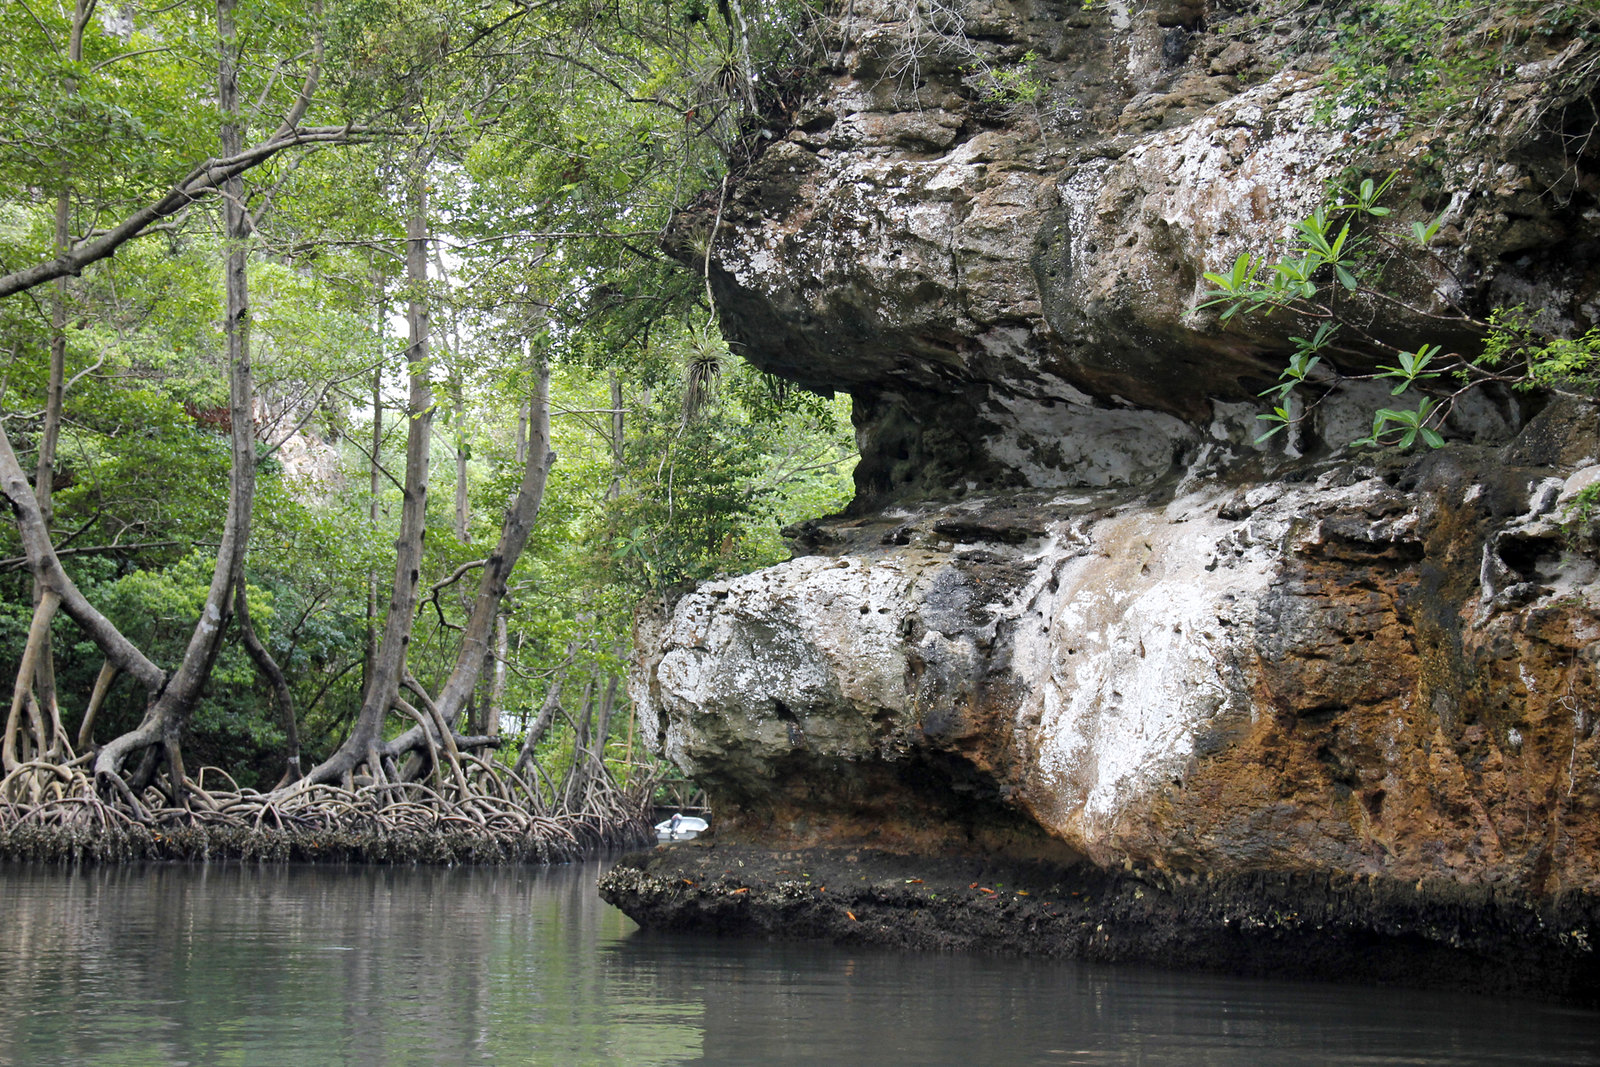 River with rock formation and mangrove trees